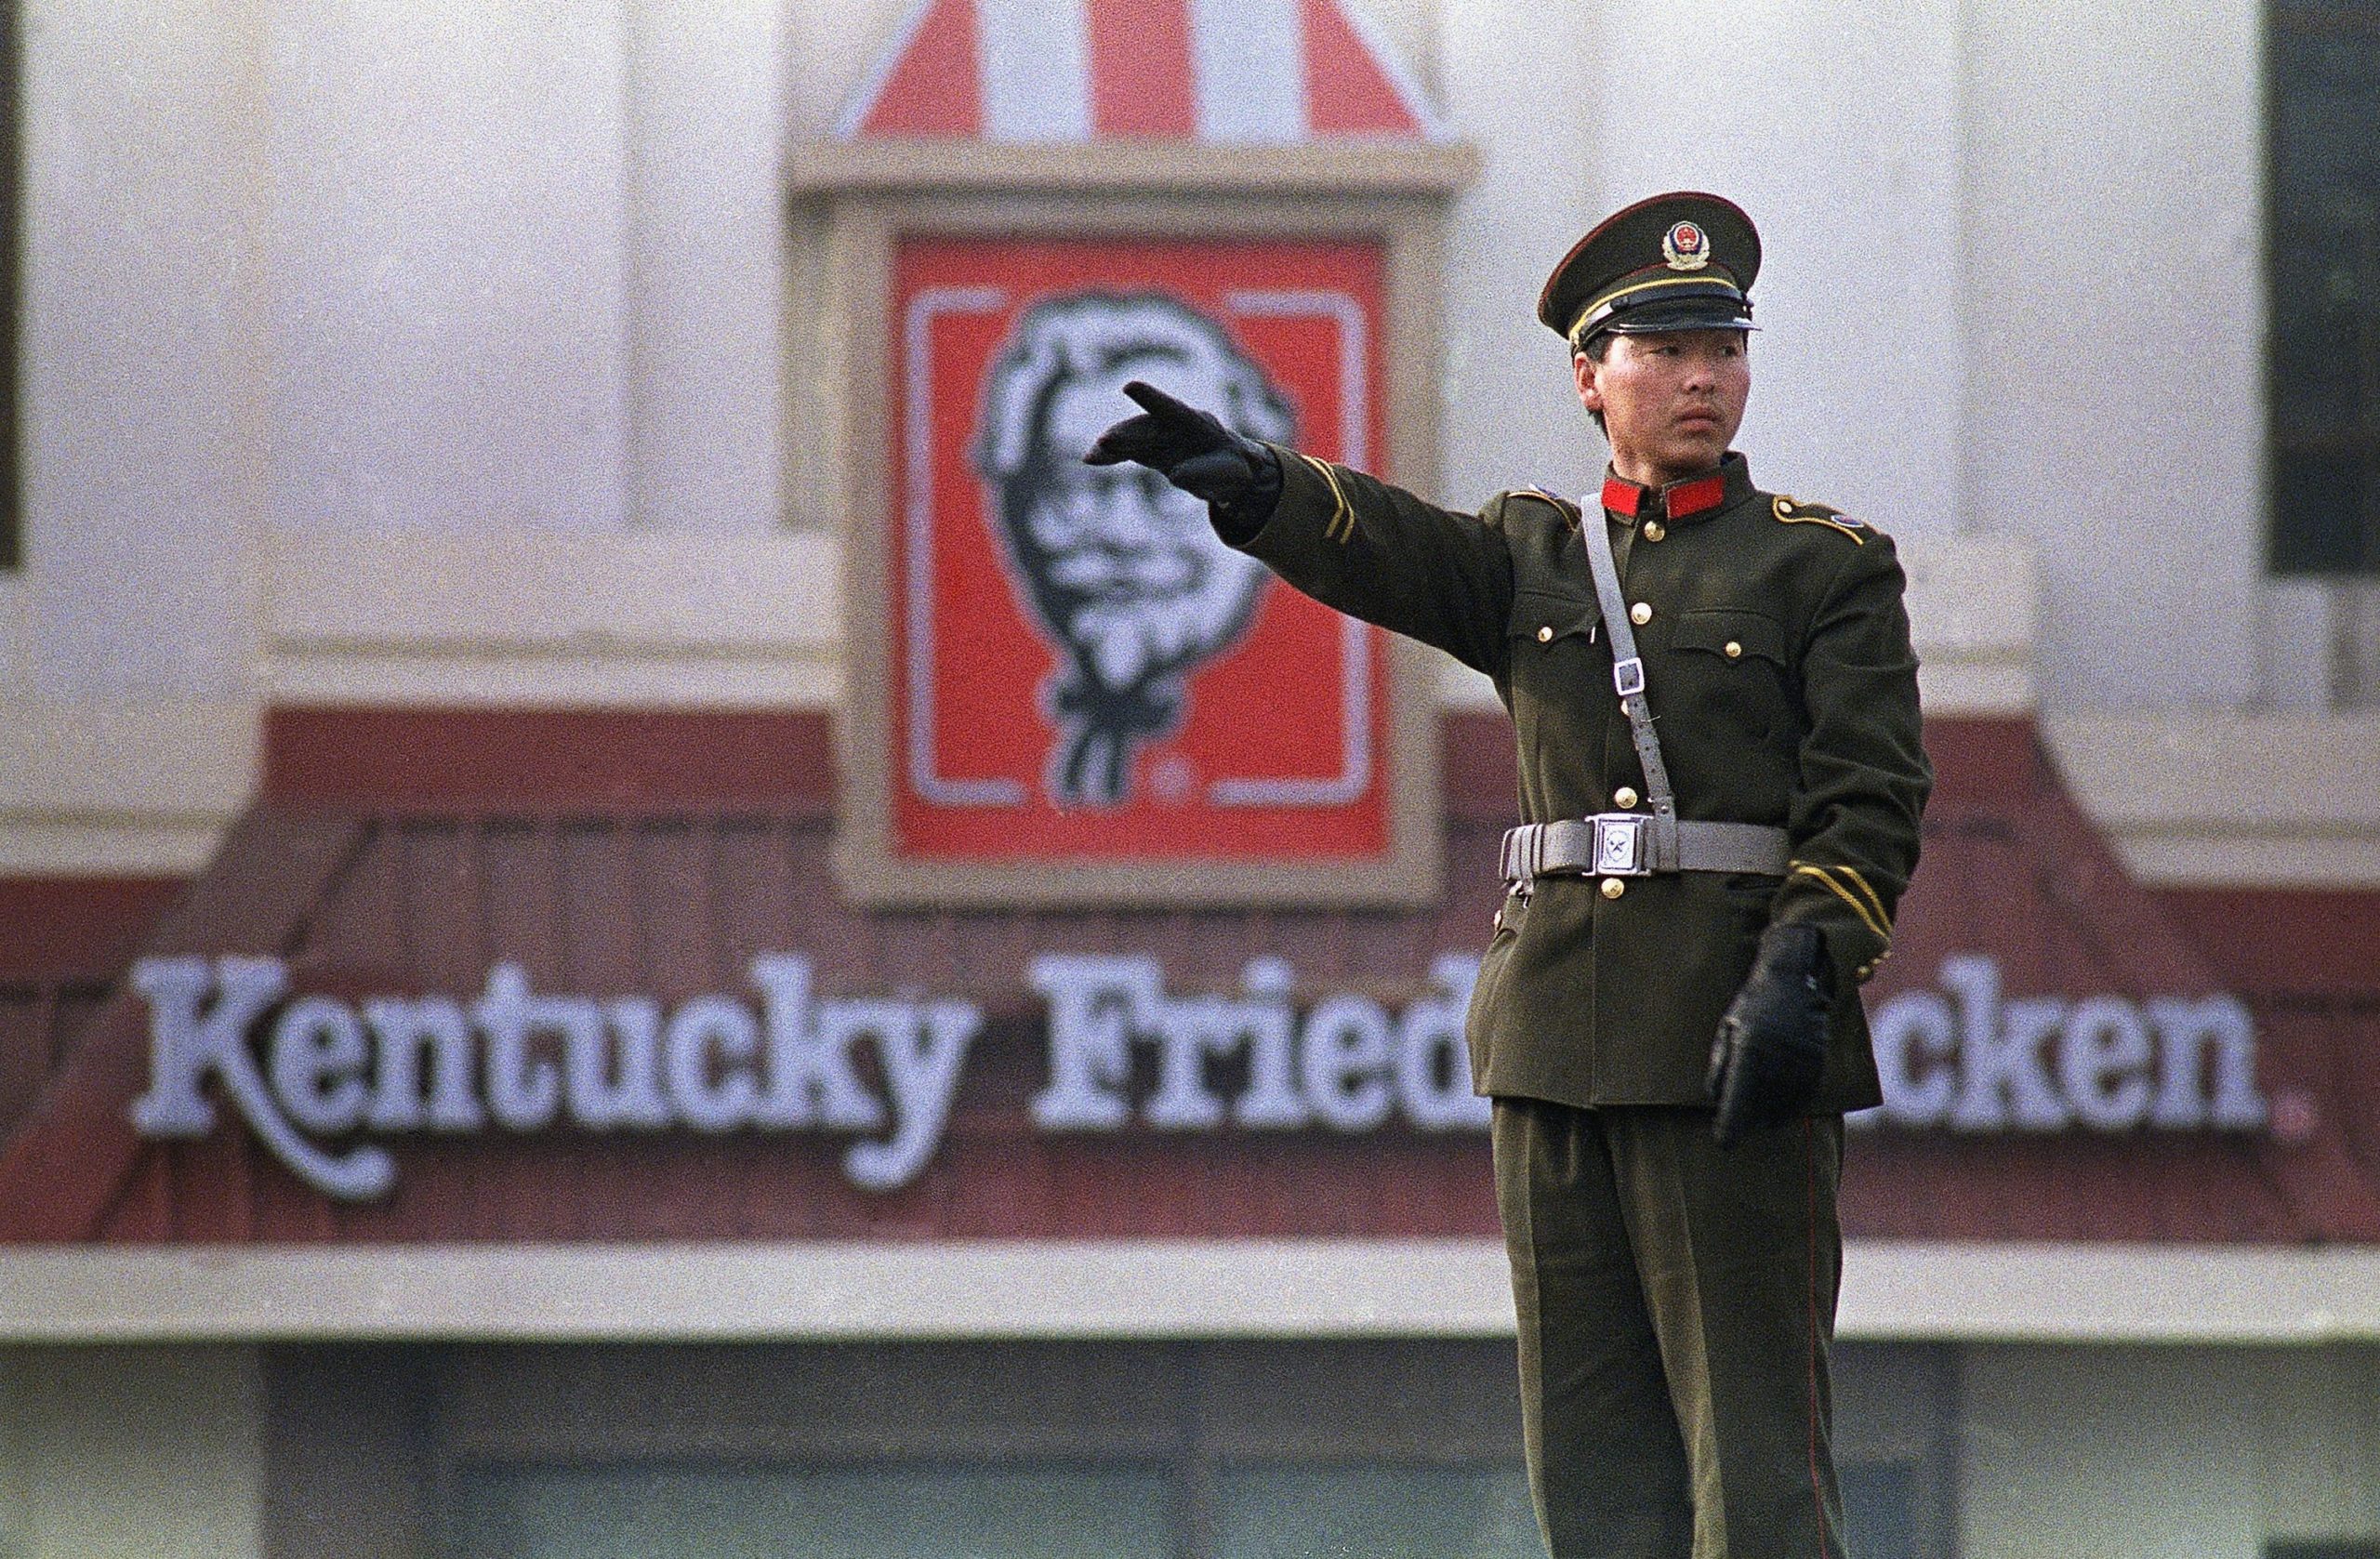 A Kentucky Fried Chicken restaurant in Beijing, China, photographed in 1989. (Photo: Mark Avery, AP)